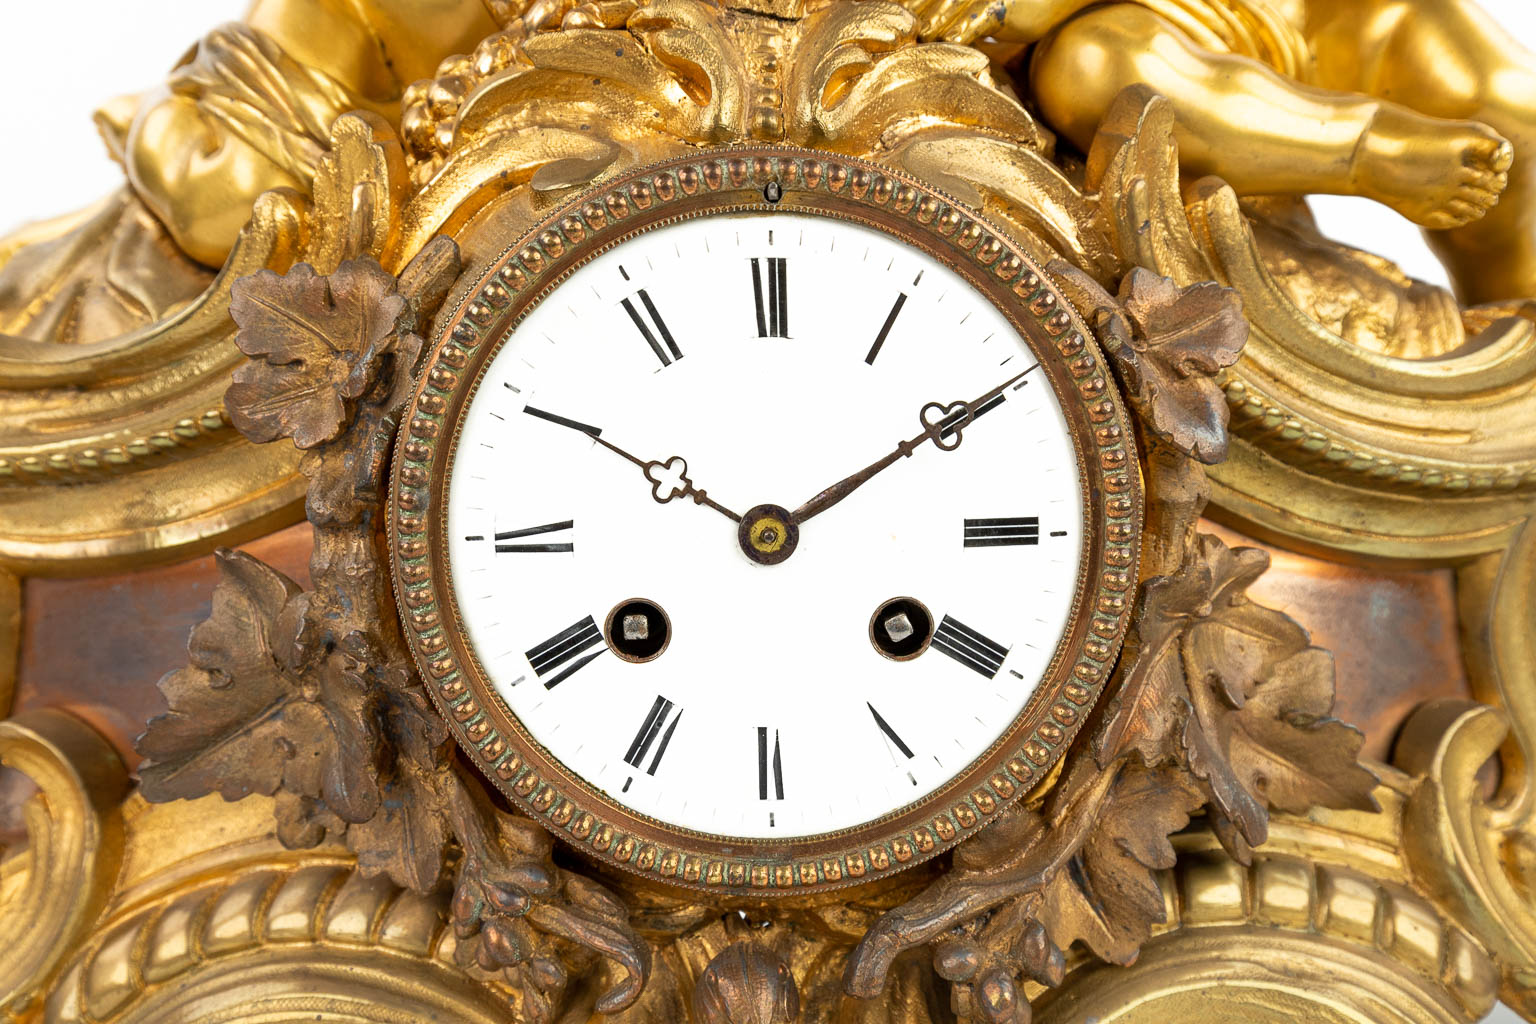 A mantle clock made of gilt bronze and decorated with putti in Louis XV style. (H:36cm)